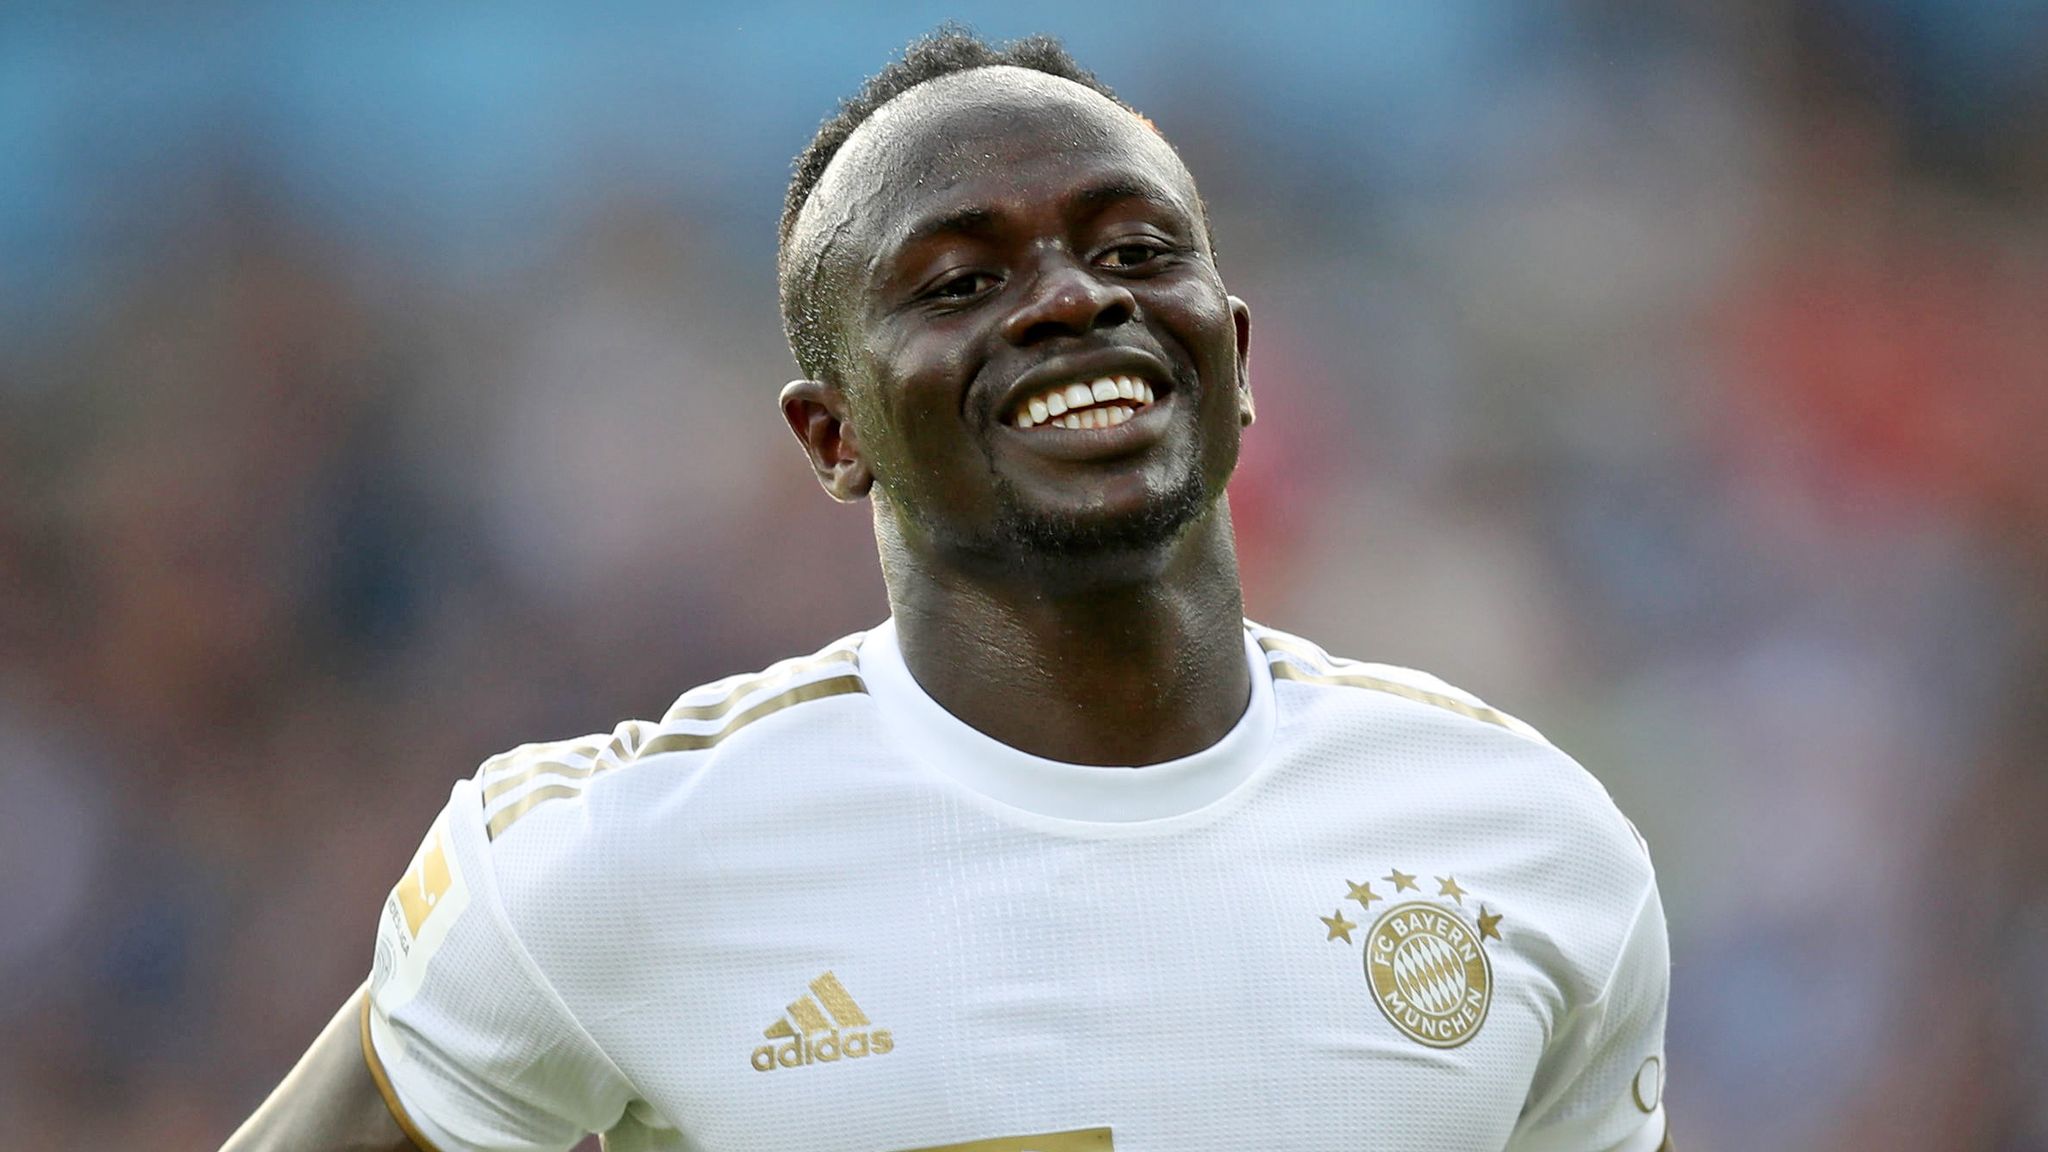 Sadio Mane: Bayern Munich winger to have Al Nassr medical on Monday ahead of £24m deal and £34m salary | Transfer Centre News | Sky Sports